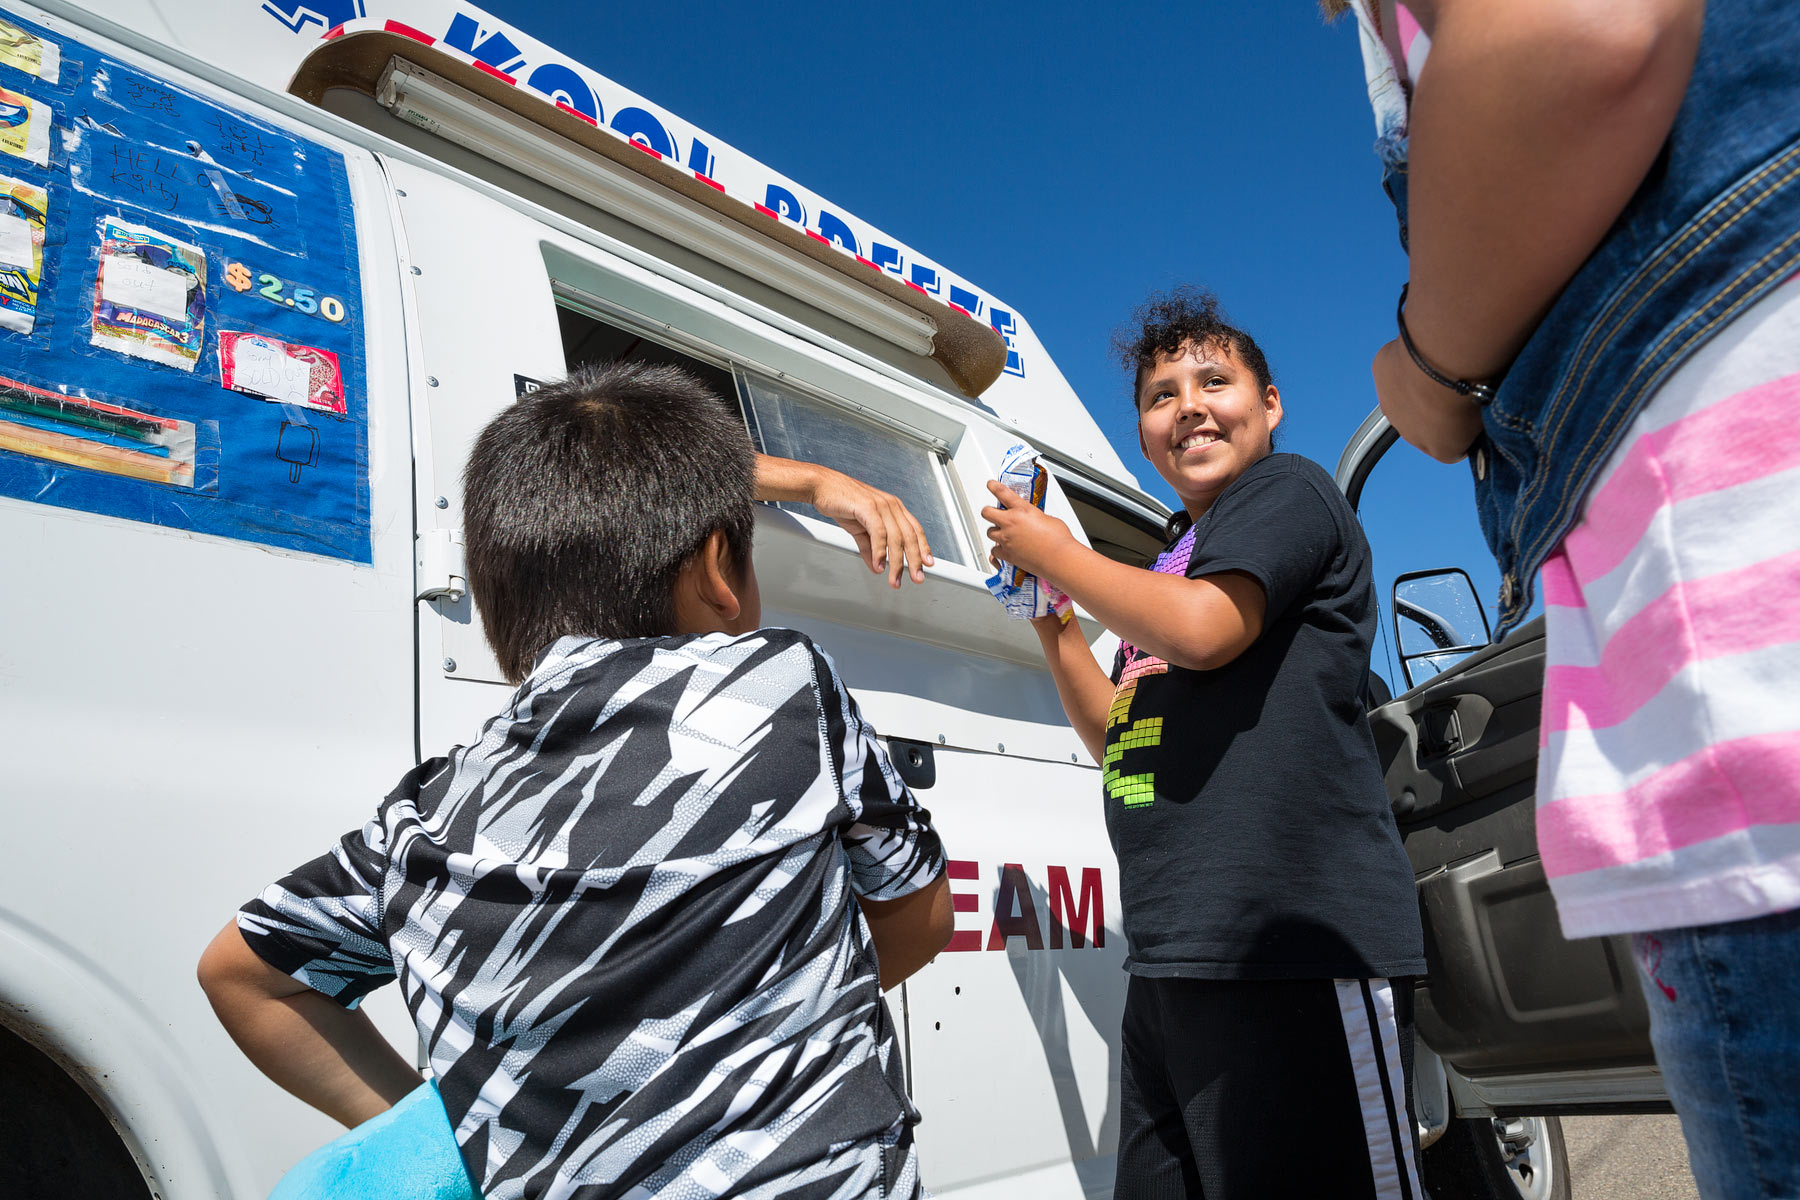 Browning kids are thrilled for the arrival of the Kool Breeze Ice Cream Truck on their street.